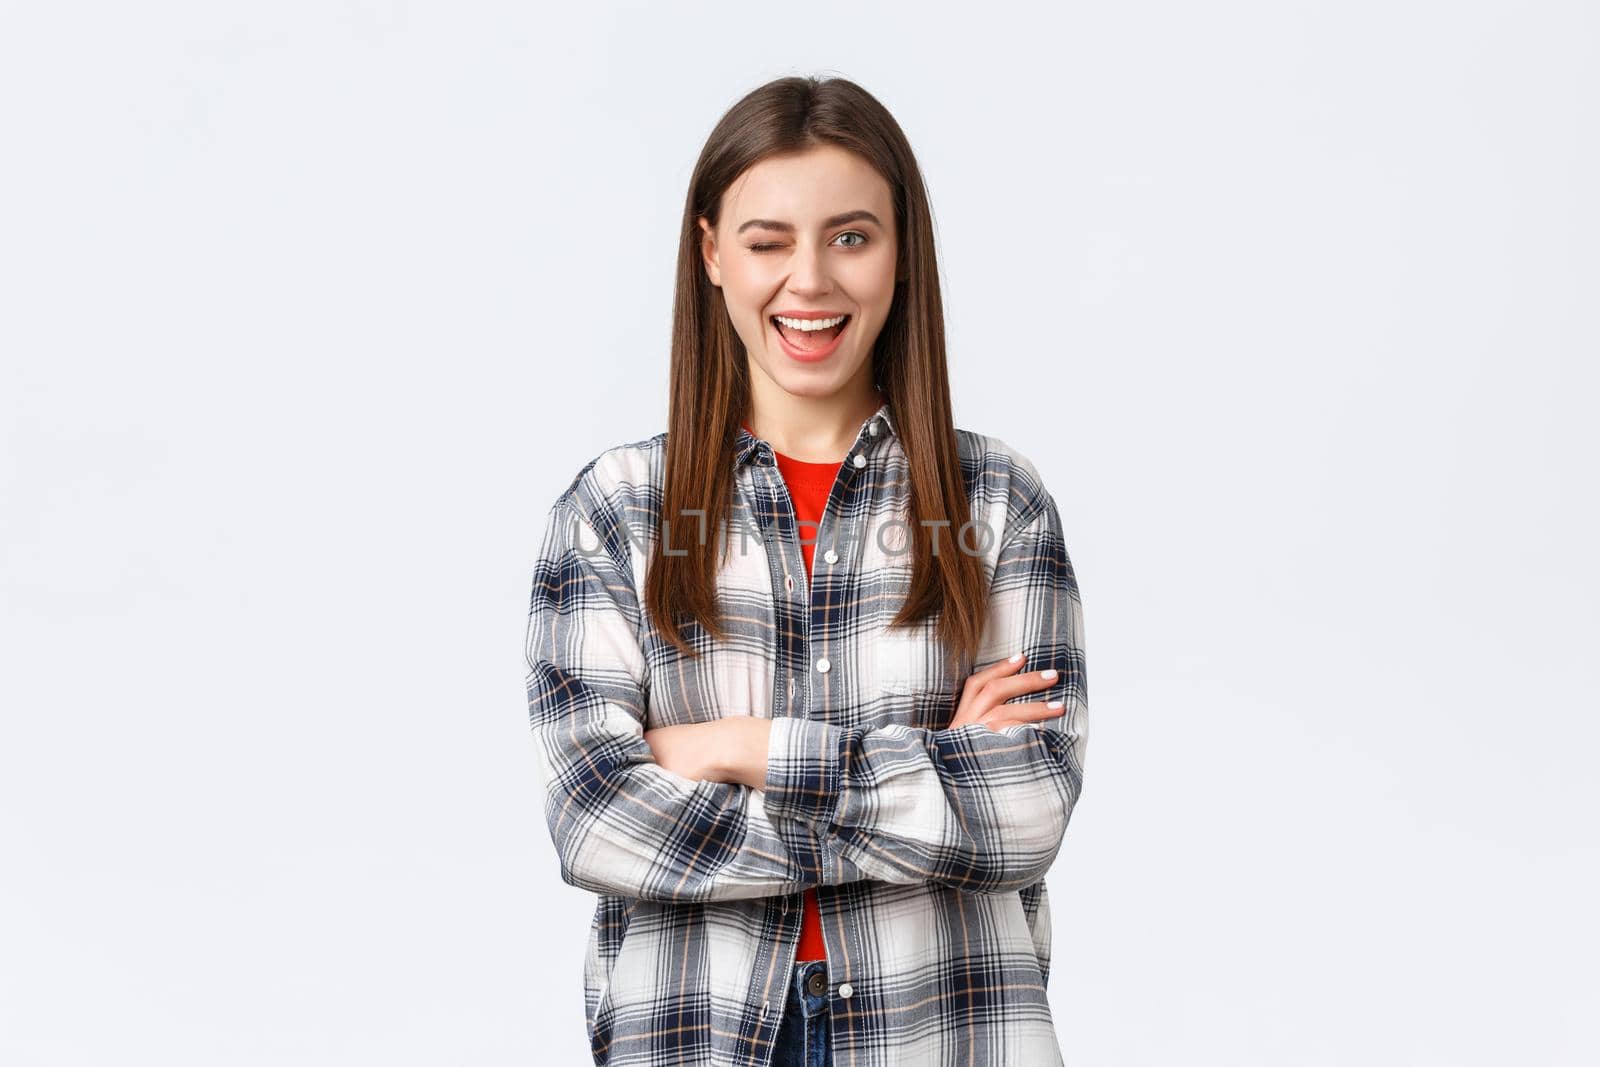 Lifestyle, different emotions, leisure activities concept. Enthusiastic and confident attractive woman, female student in checked casual shirt winking excited and smiling, cross arms chest ready.